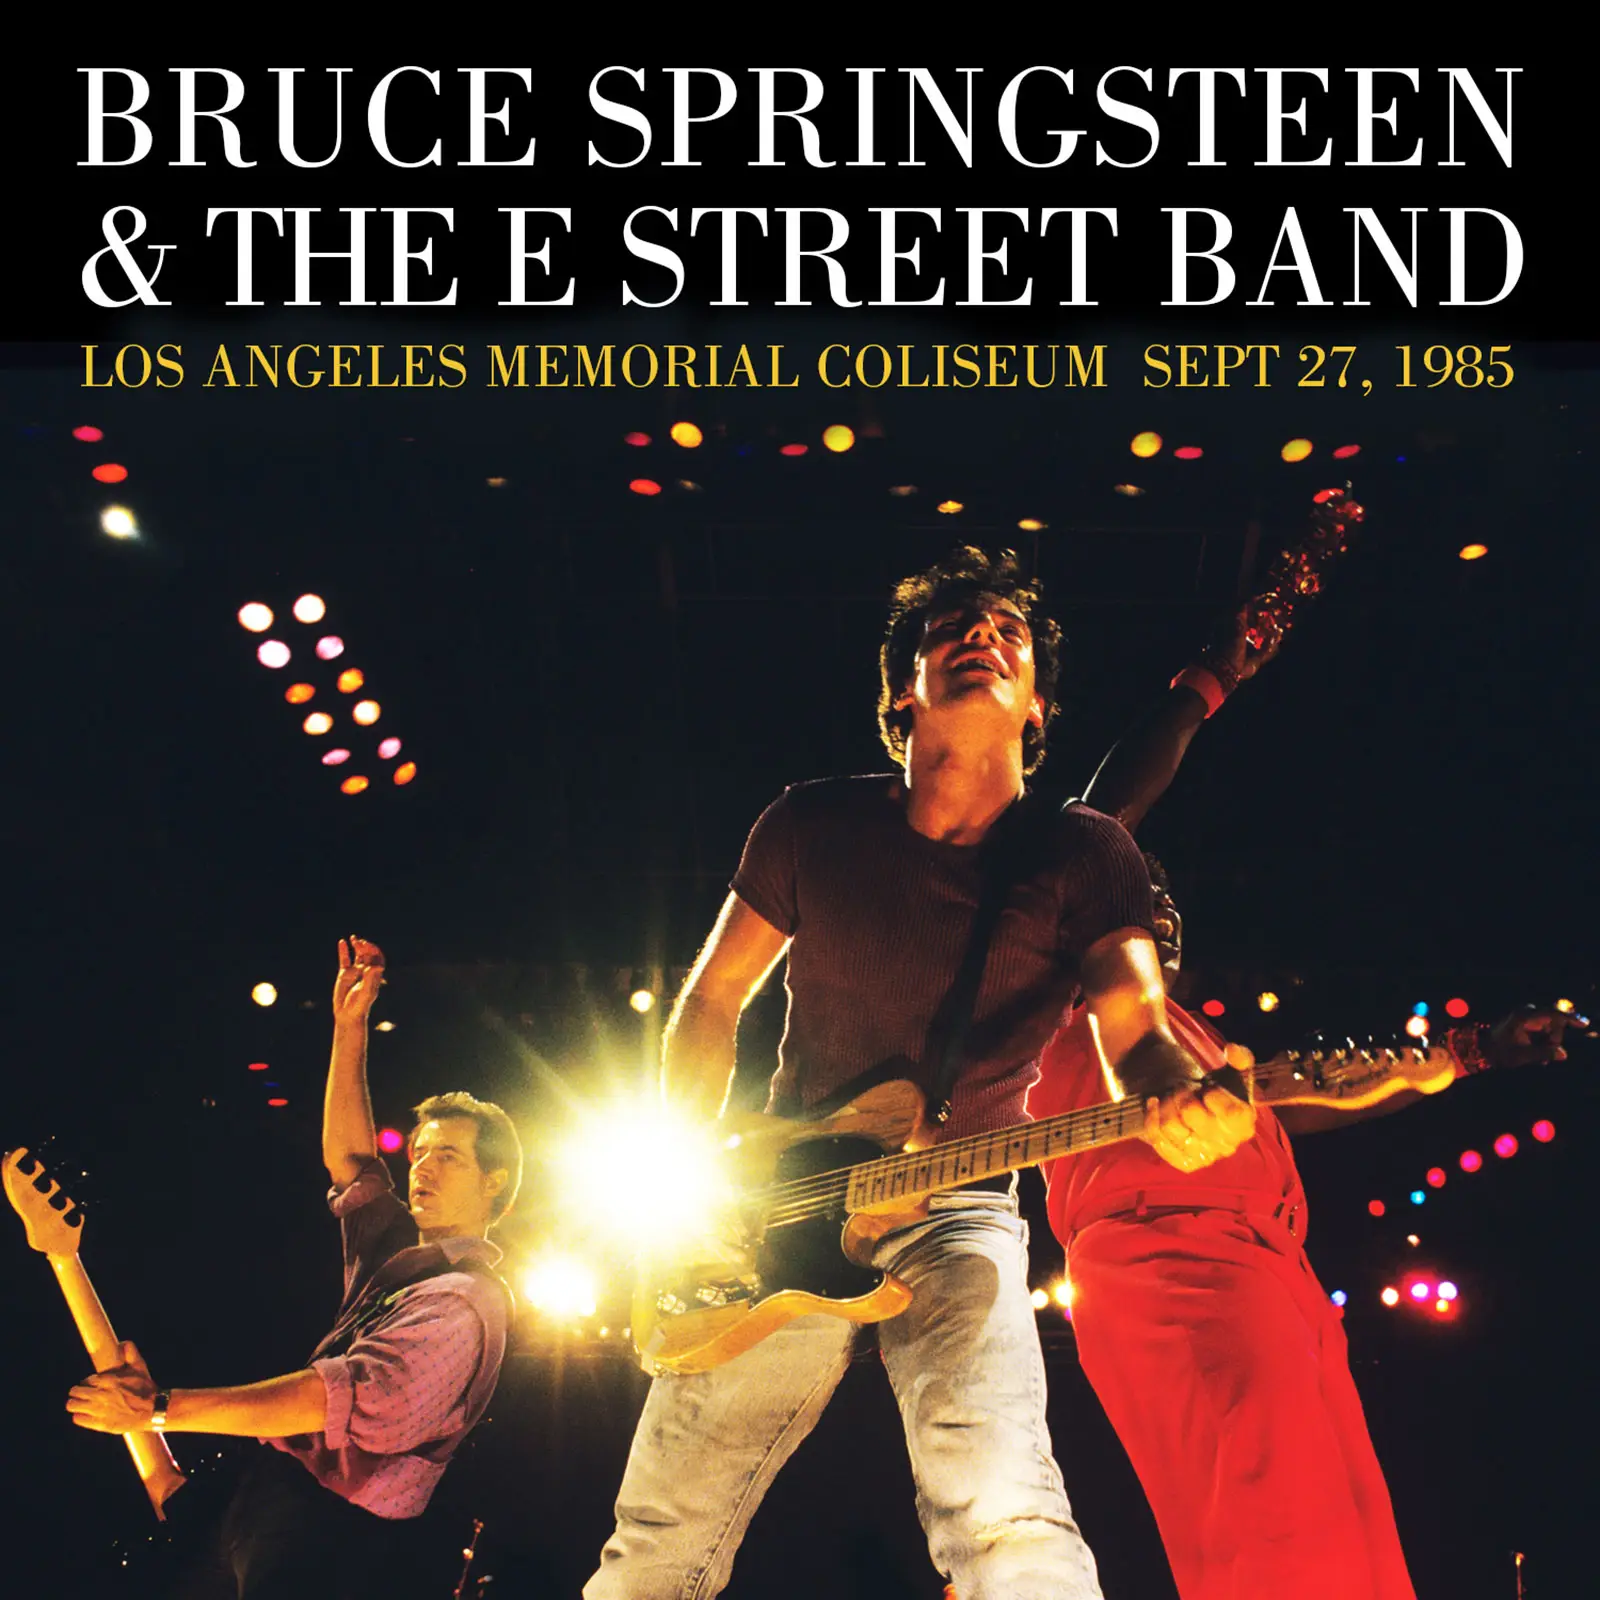 Bruce Springsteen & The E Street Band 19850927 Los Angeles Memorial